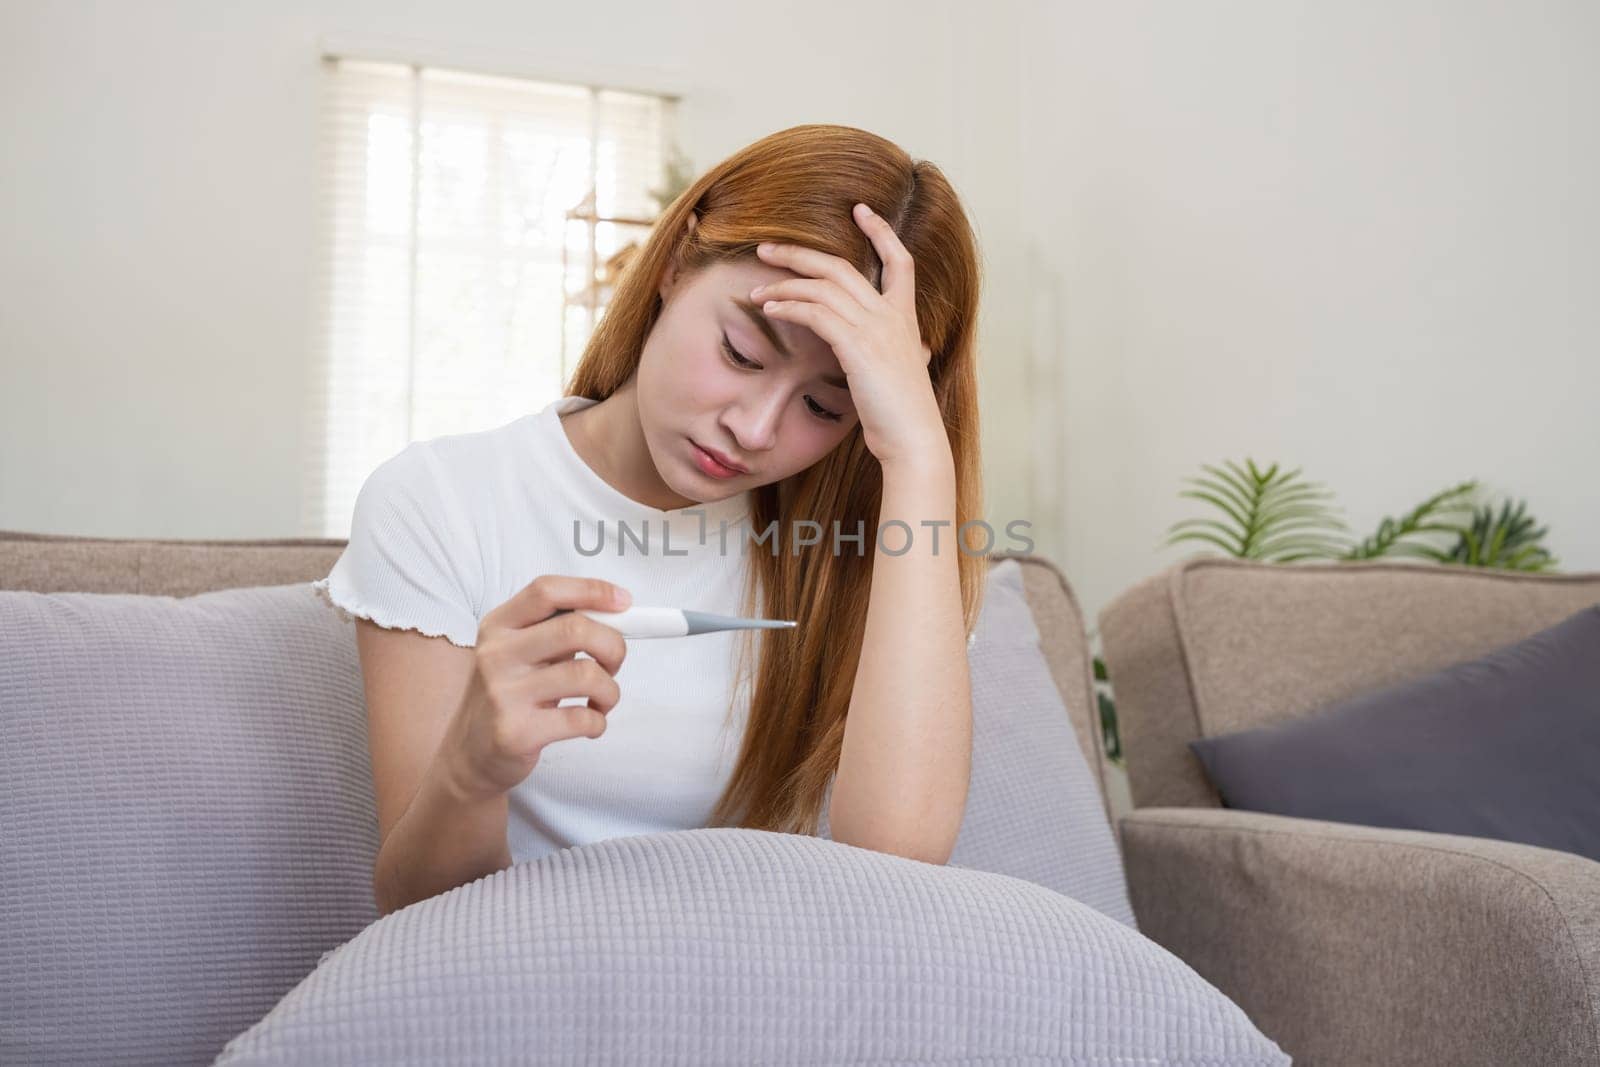 Young Asian woman with a fever, checking temperature at home. Concept of illness, fever, health issues, and self-care.